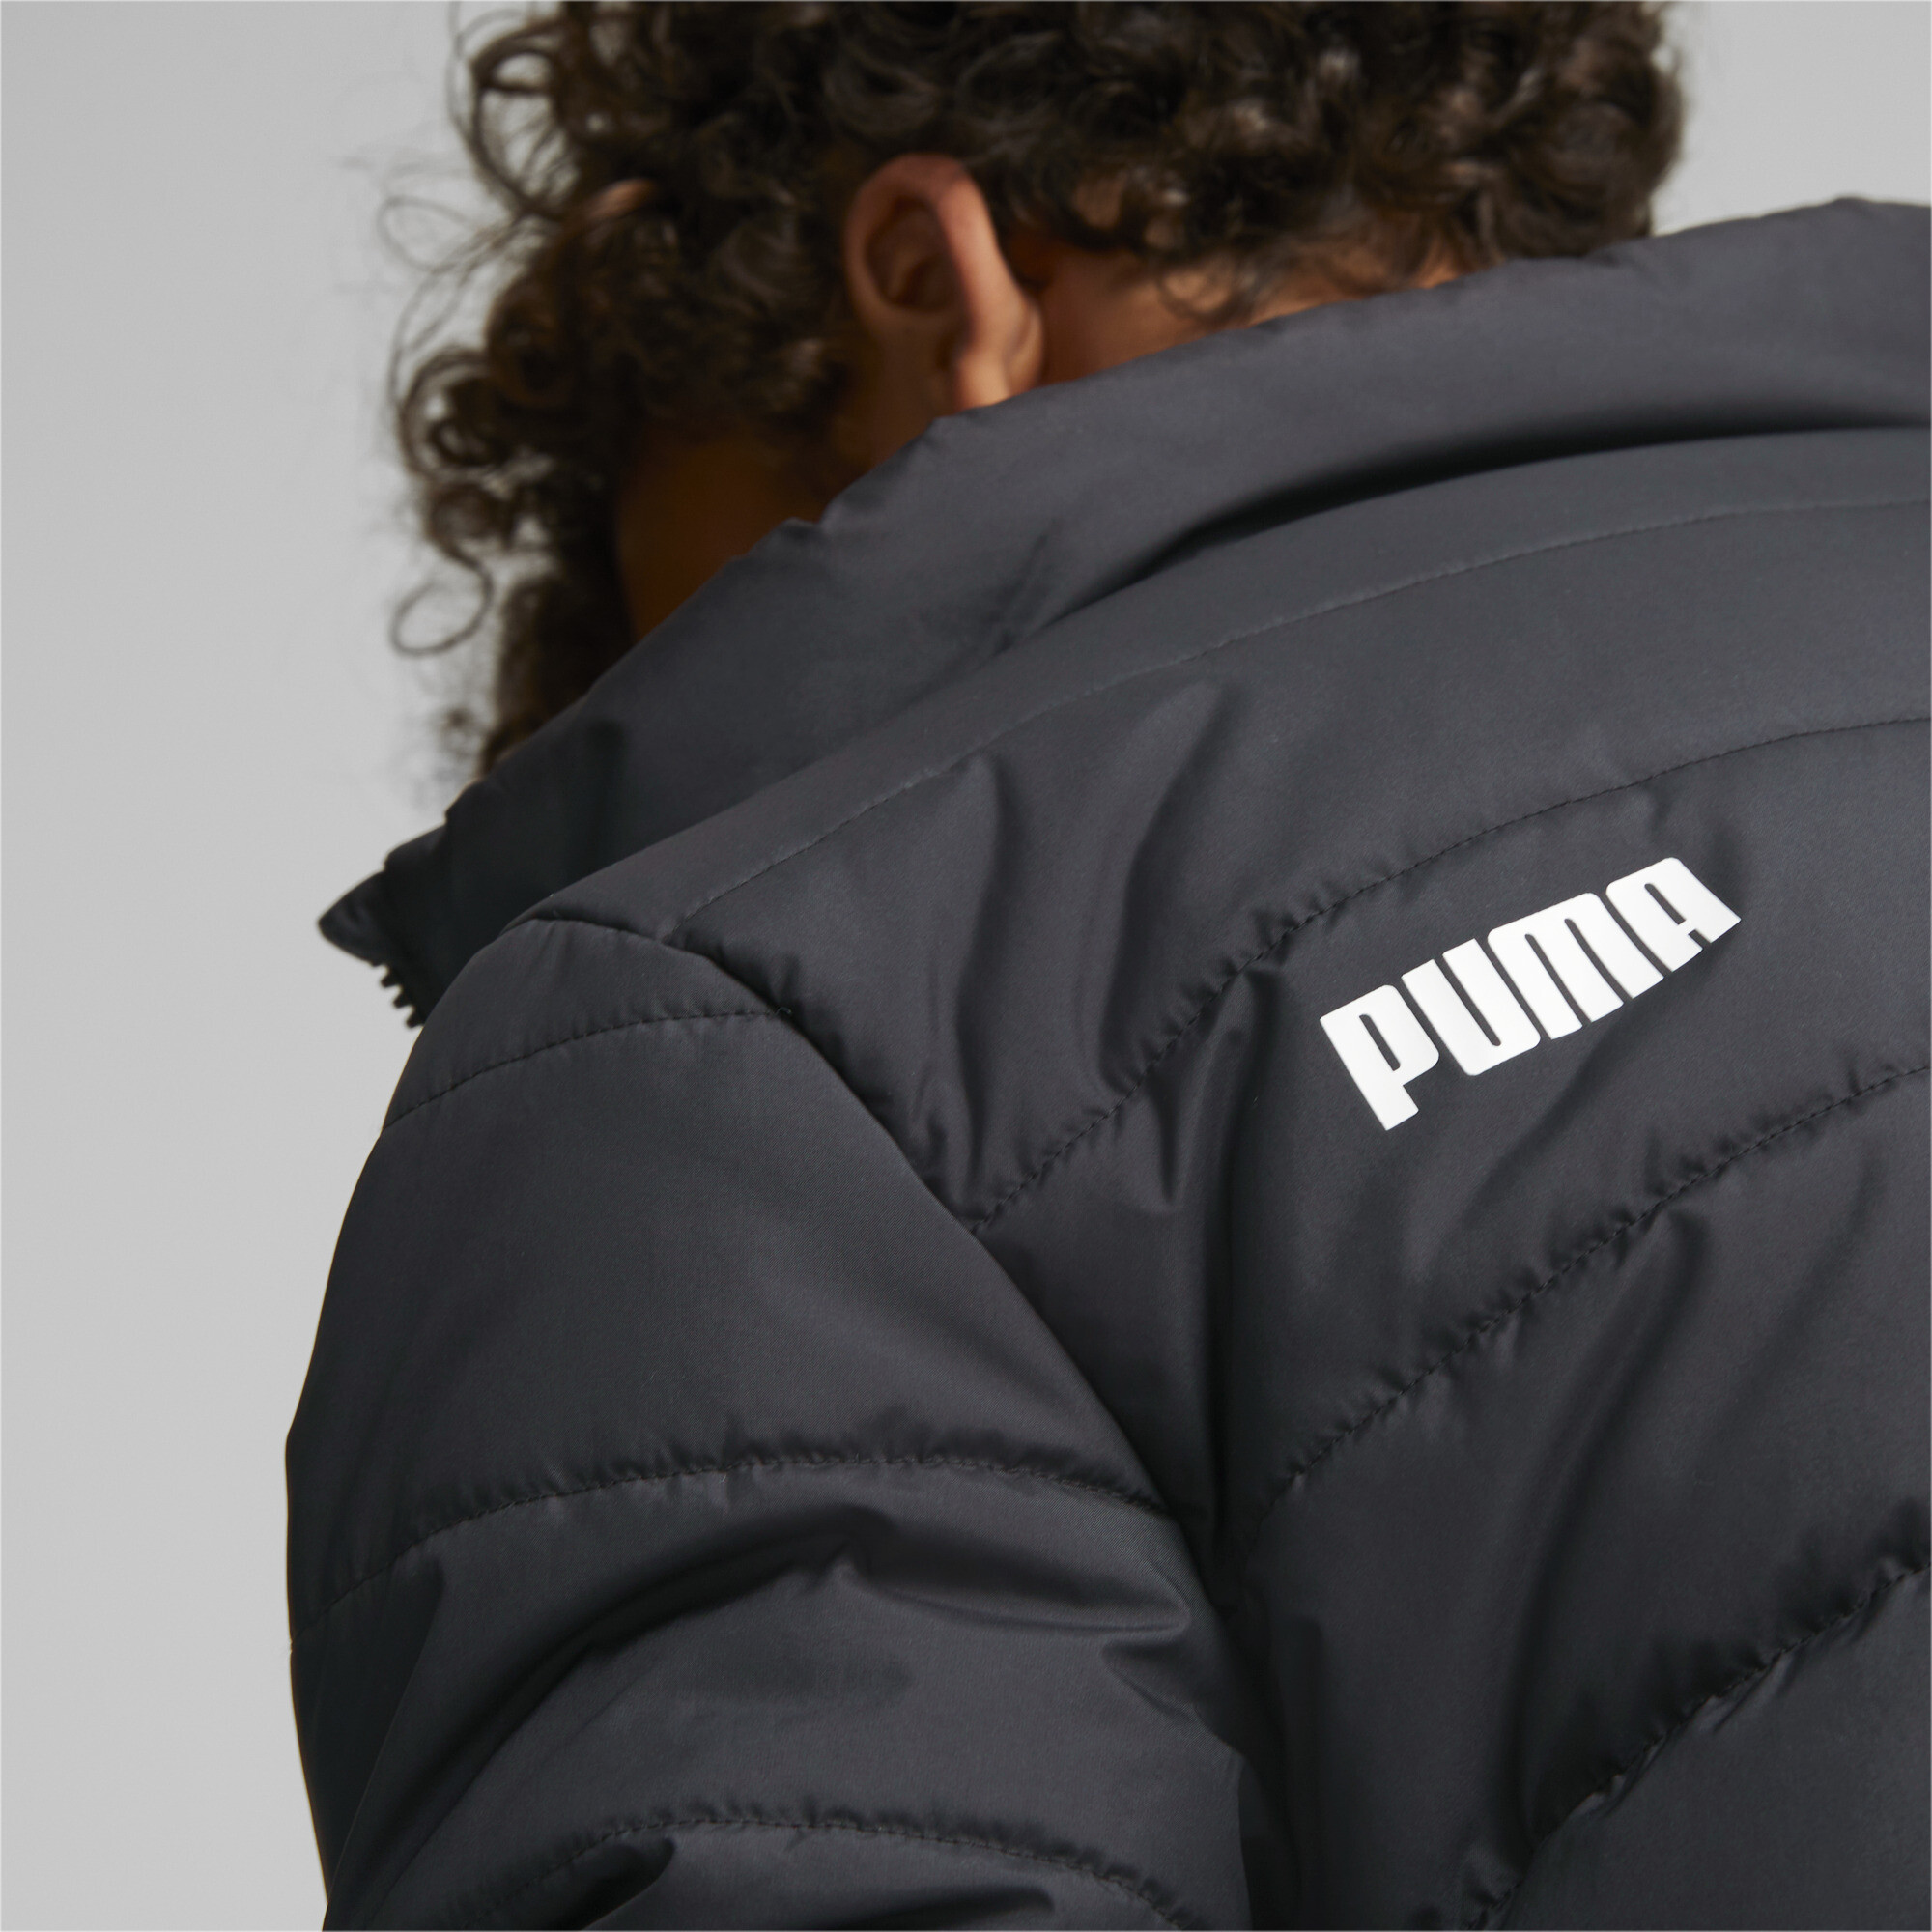 PUMA Essentials Padded Jacket In Black, Size 13-14 Youth